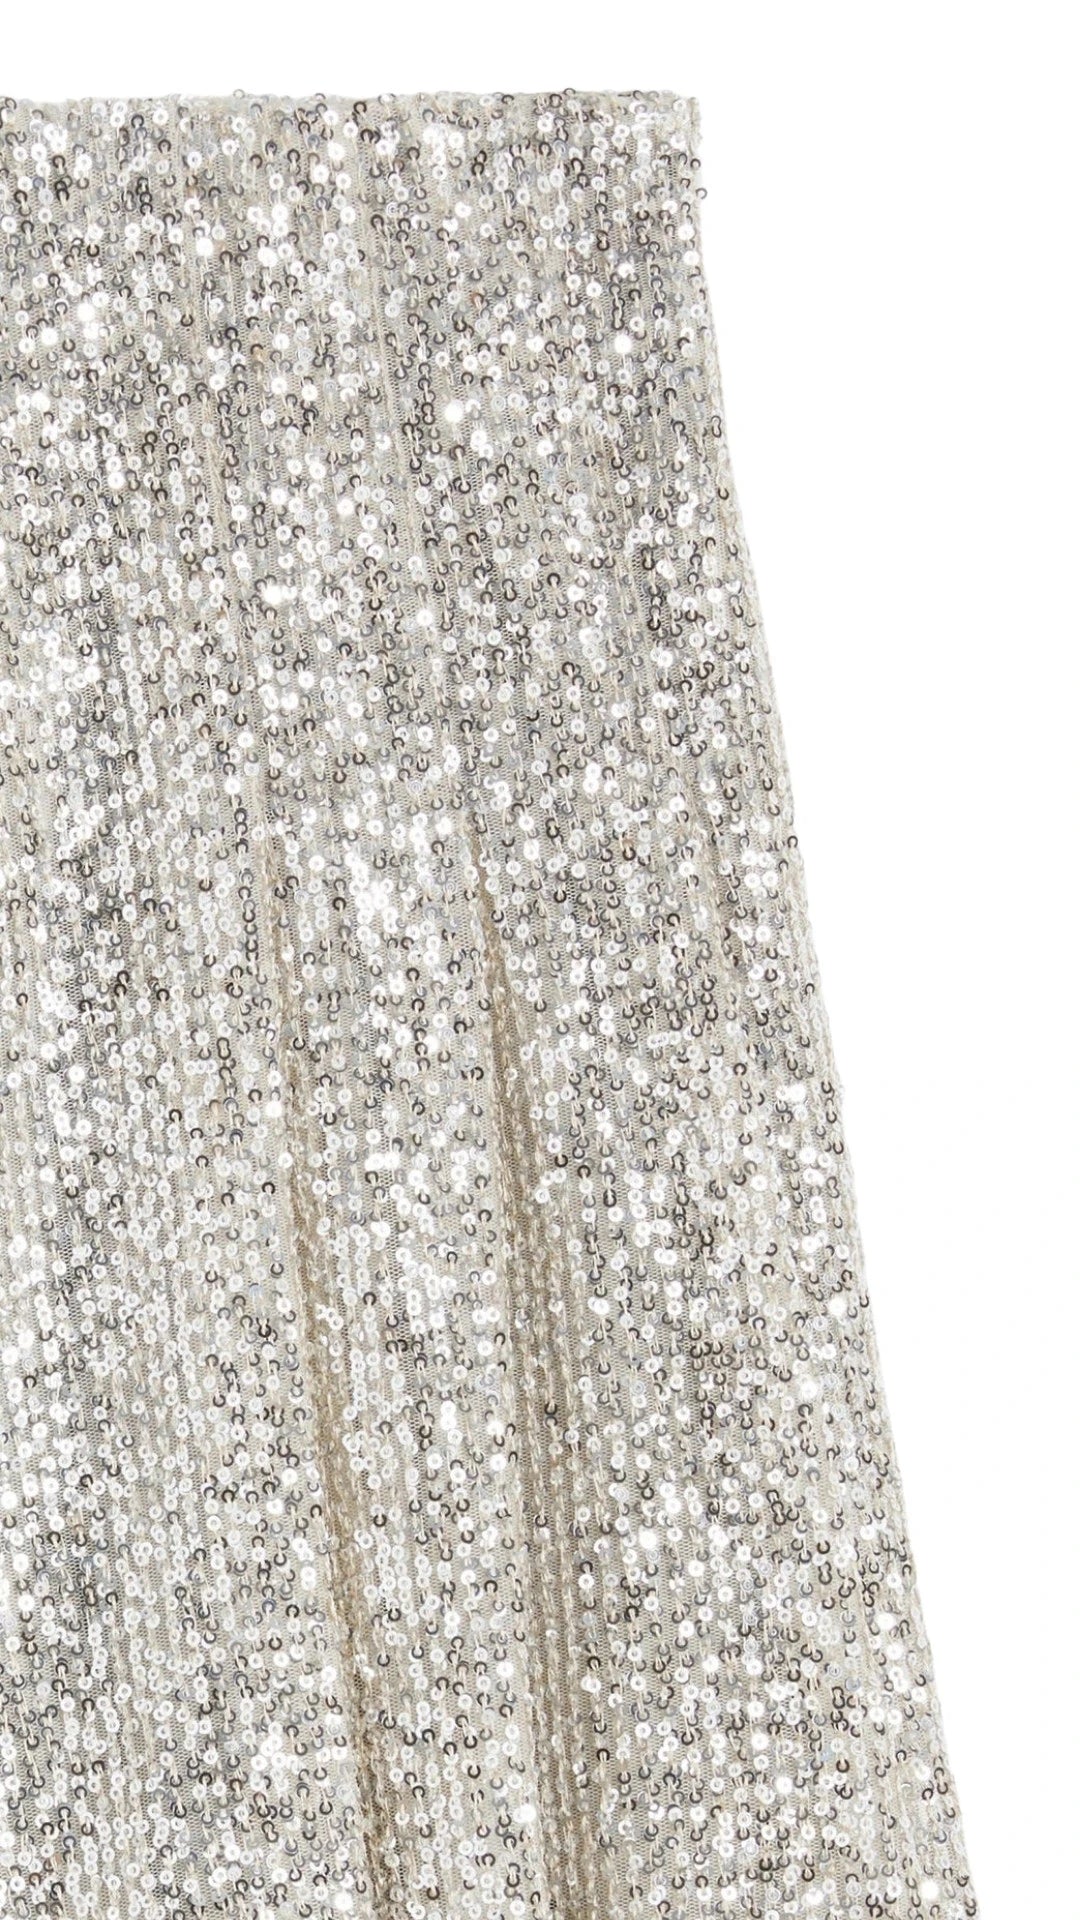 Rochas Paris Fashion High-Waisted Sparkle Shorts in silver sequins. High waisted with a wide leg that lands just above the knee. Detail of sequin material.